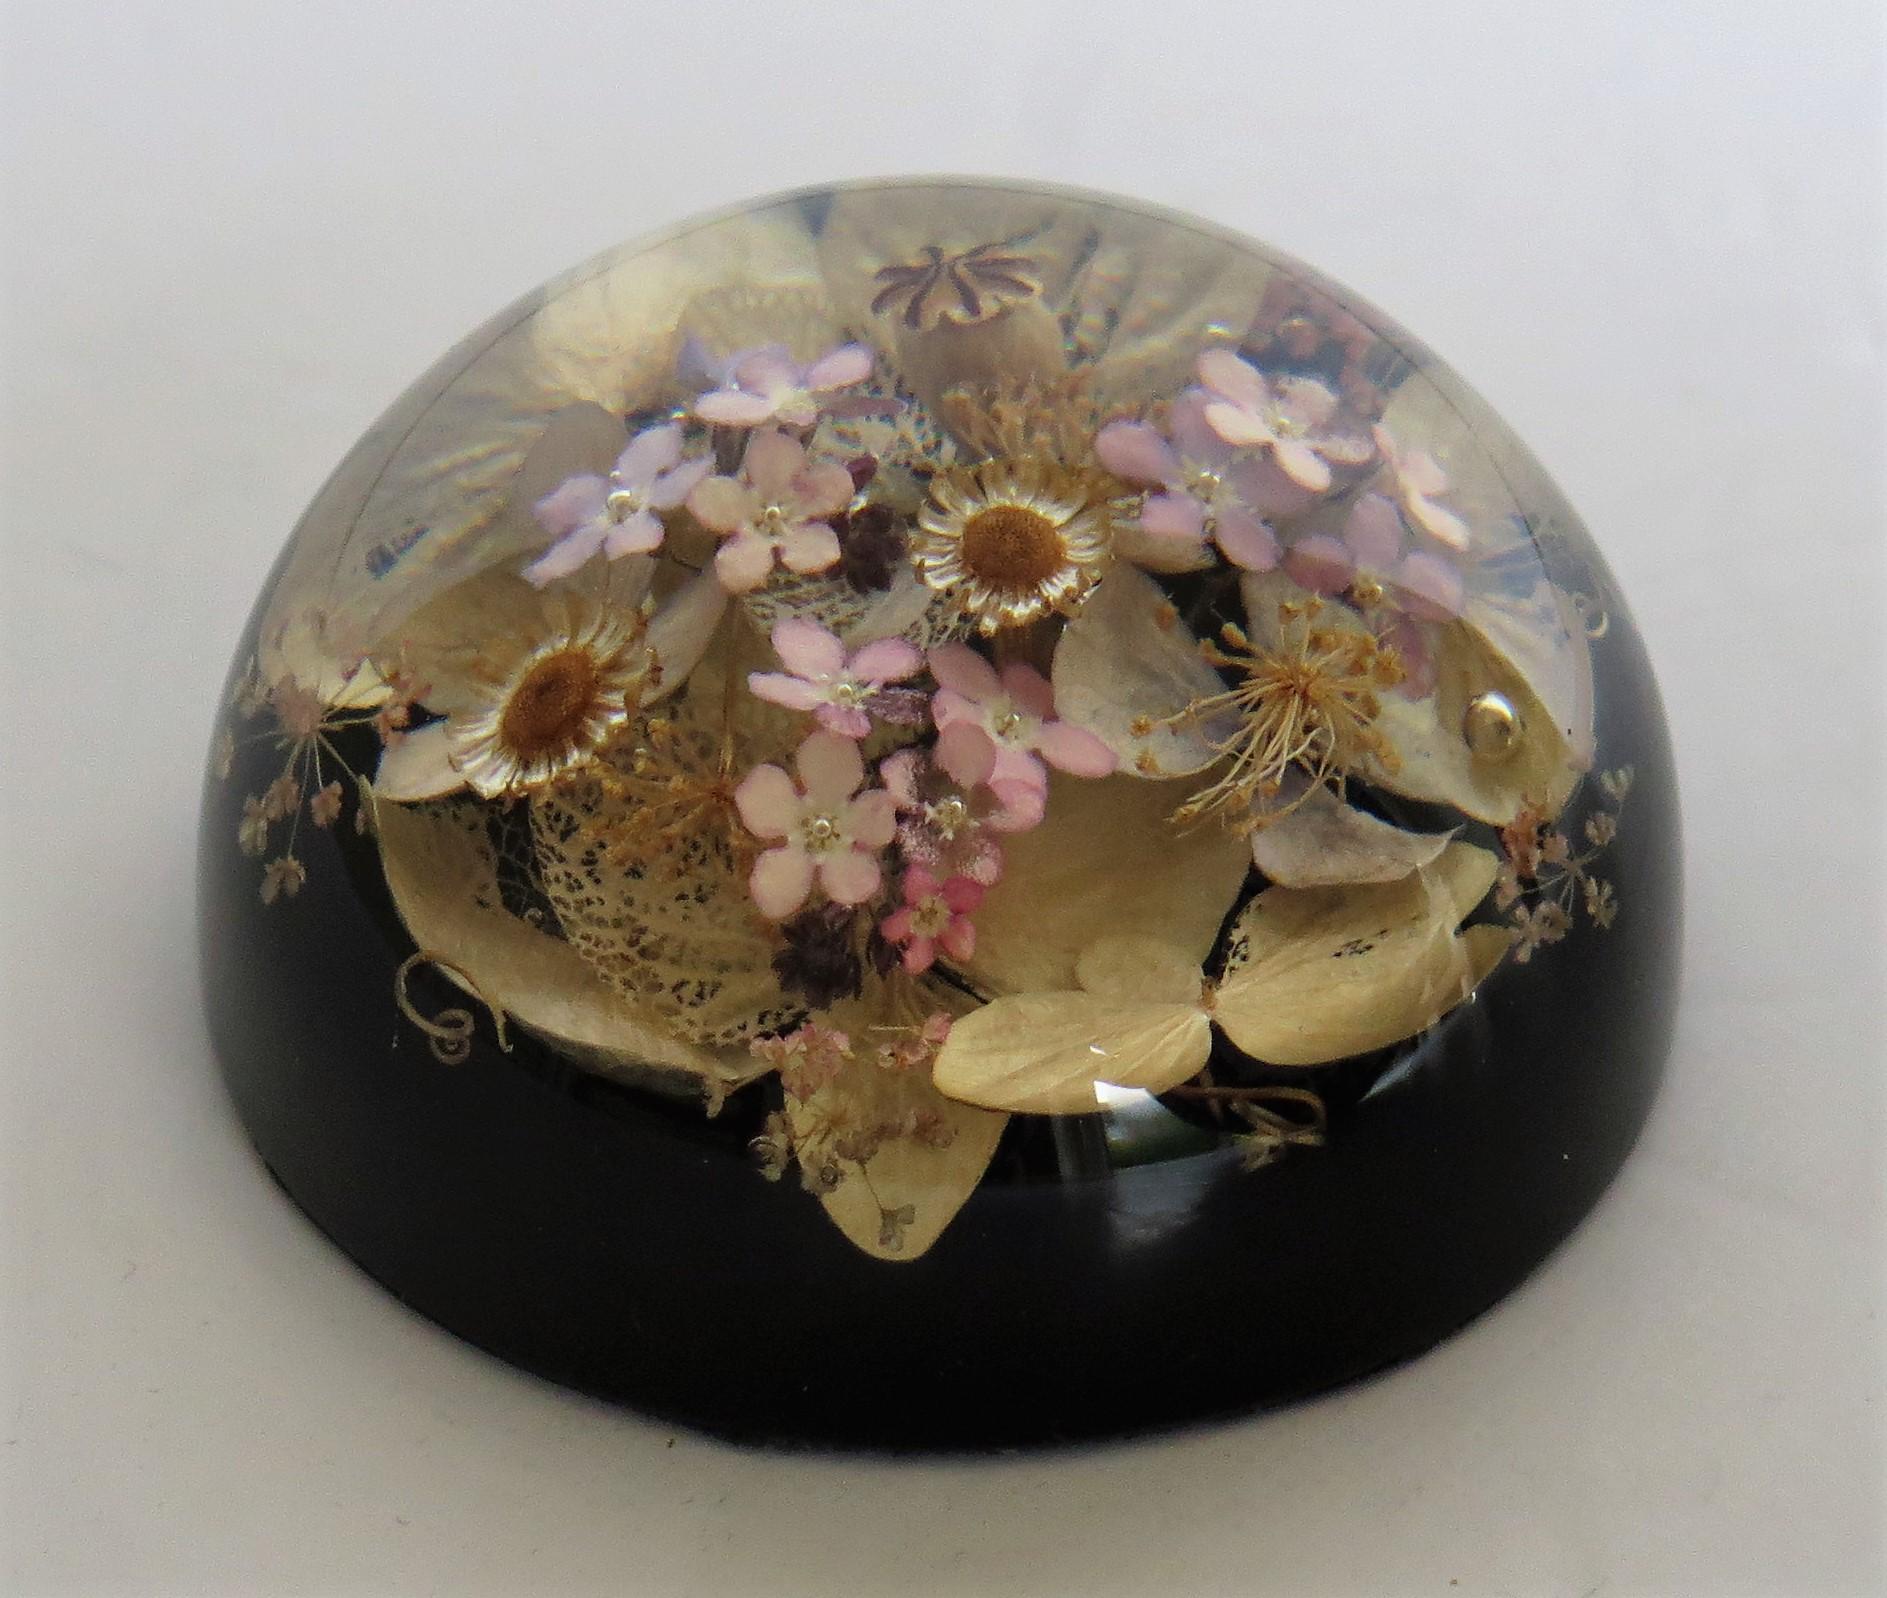 Acrylic Handmade Paperweight with Real Wild Flowers by Sarah Rogers, English circa 1970s